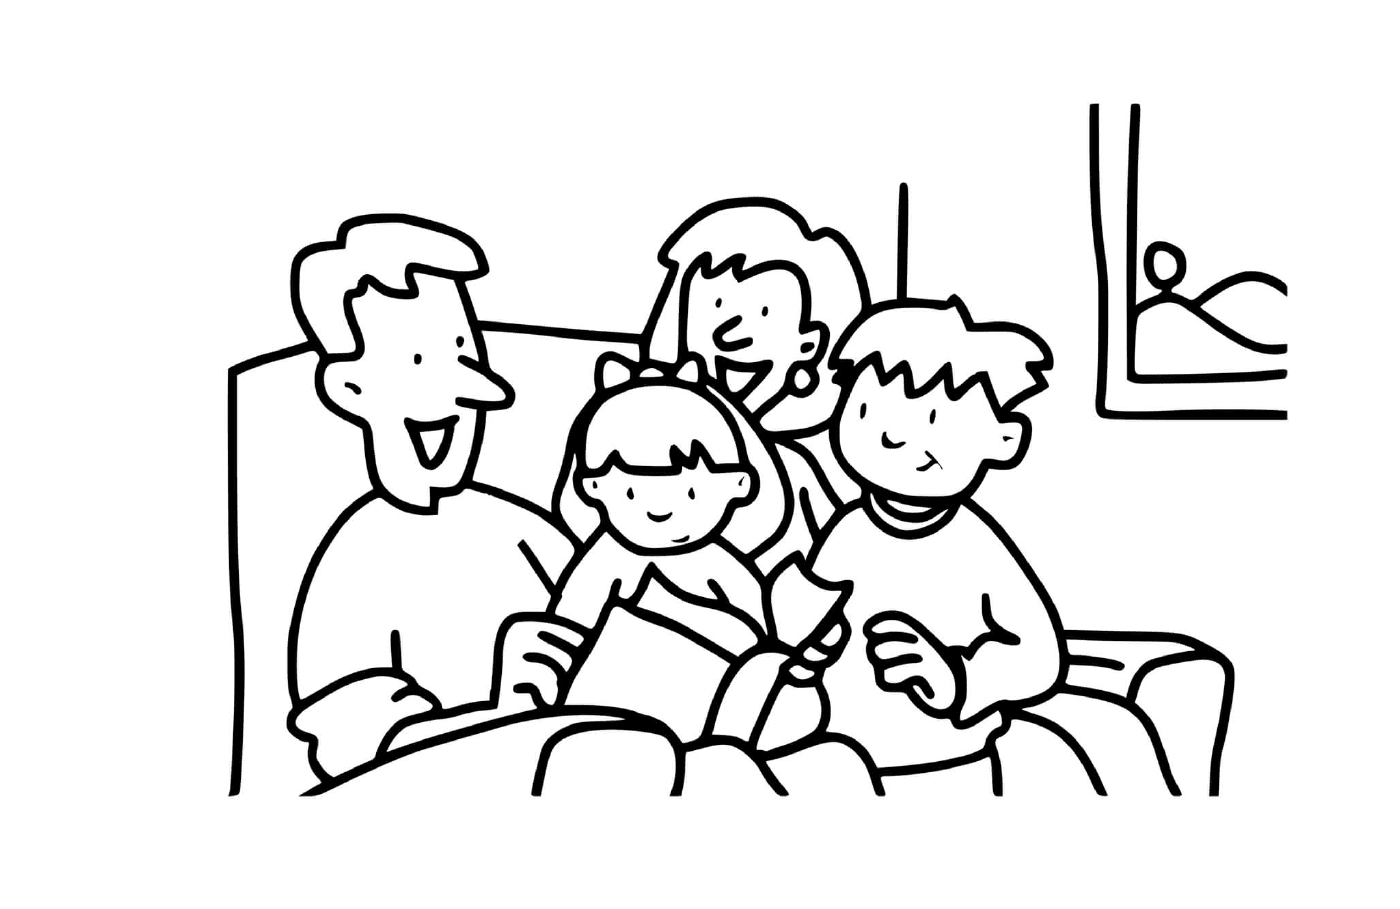  A group of people sitting on a sofa 